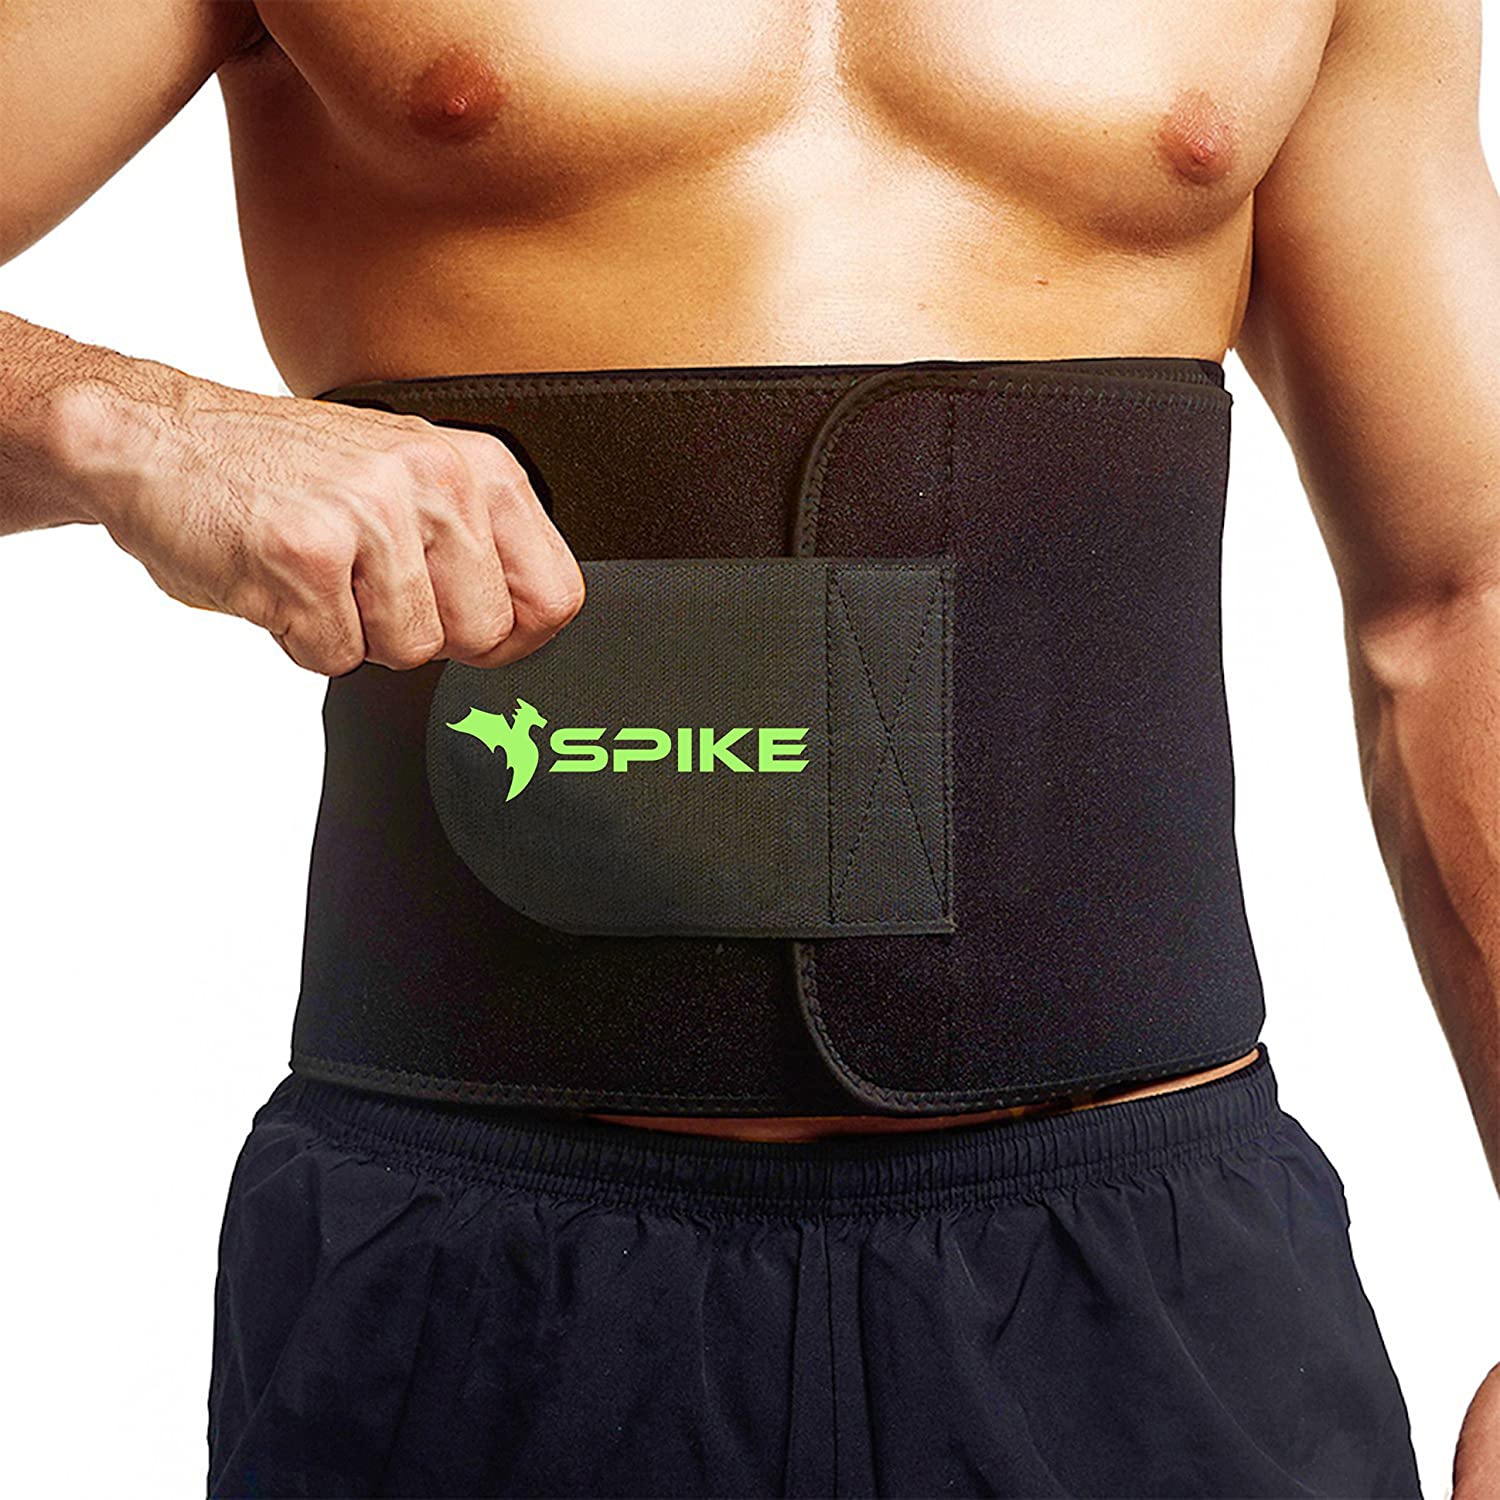 Spike Sweat Slim Belt for Fat Loss, Weight Loss and Tummy Trimming